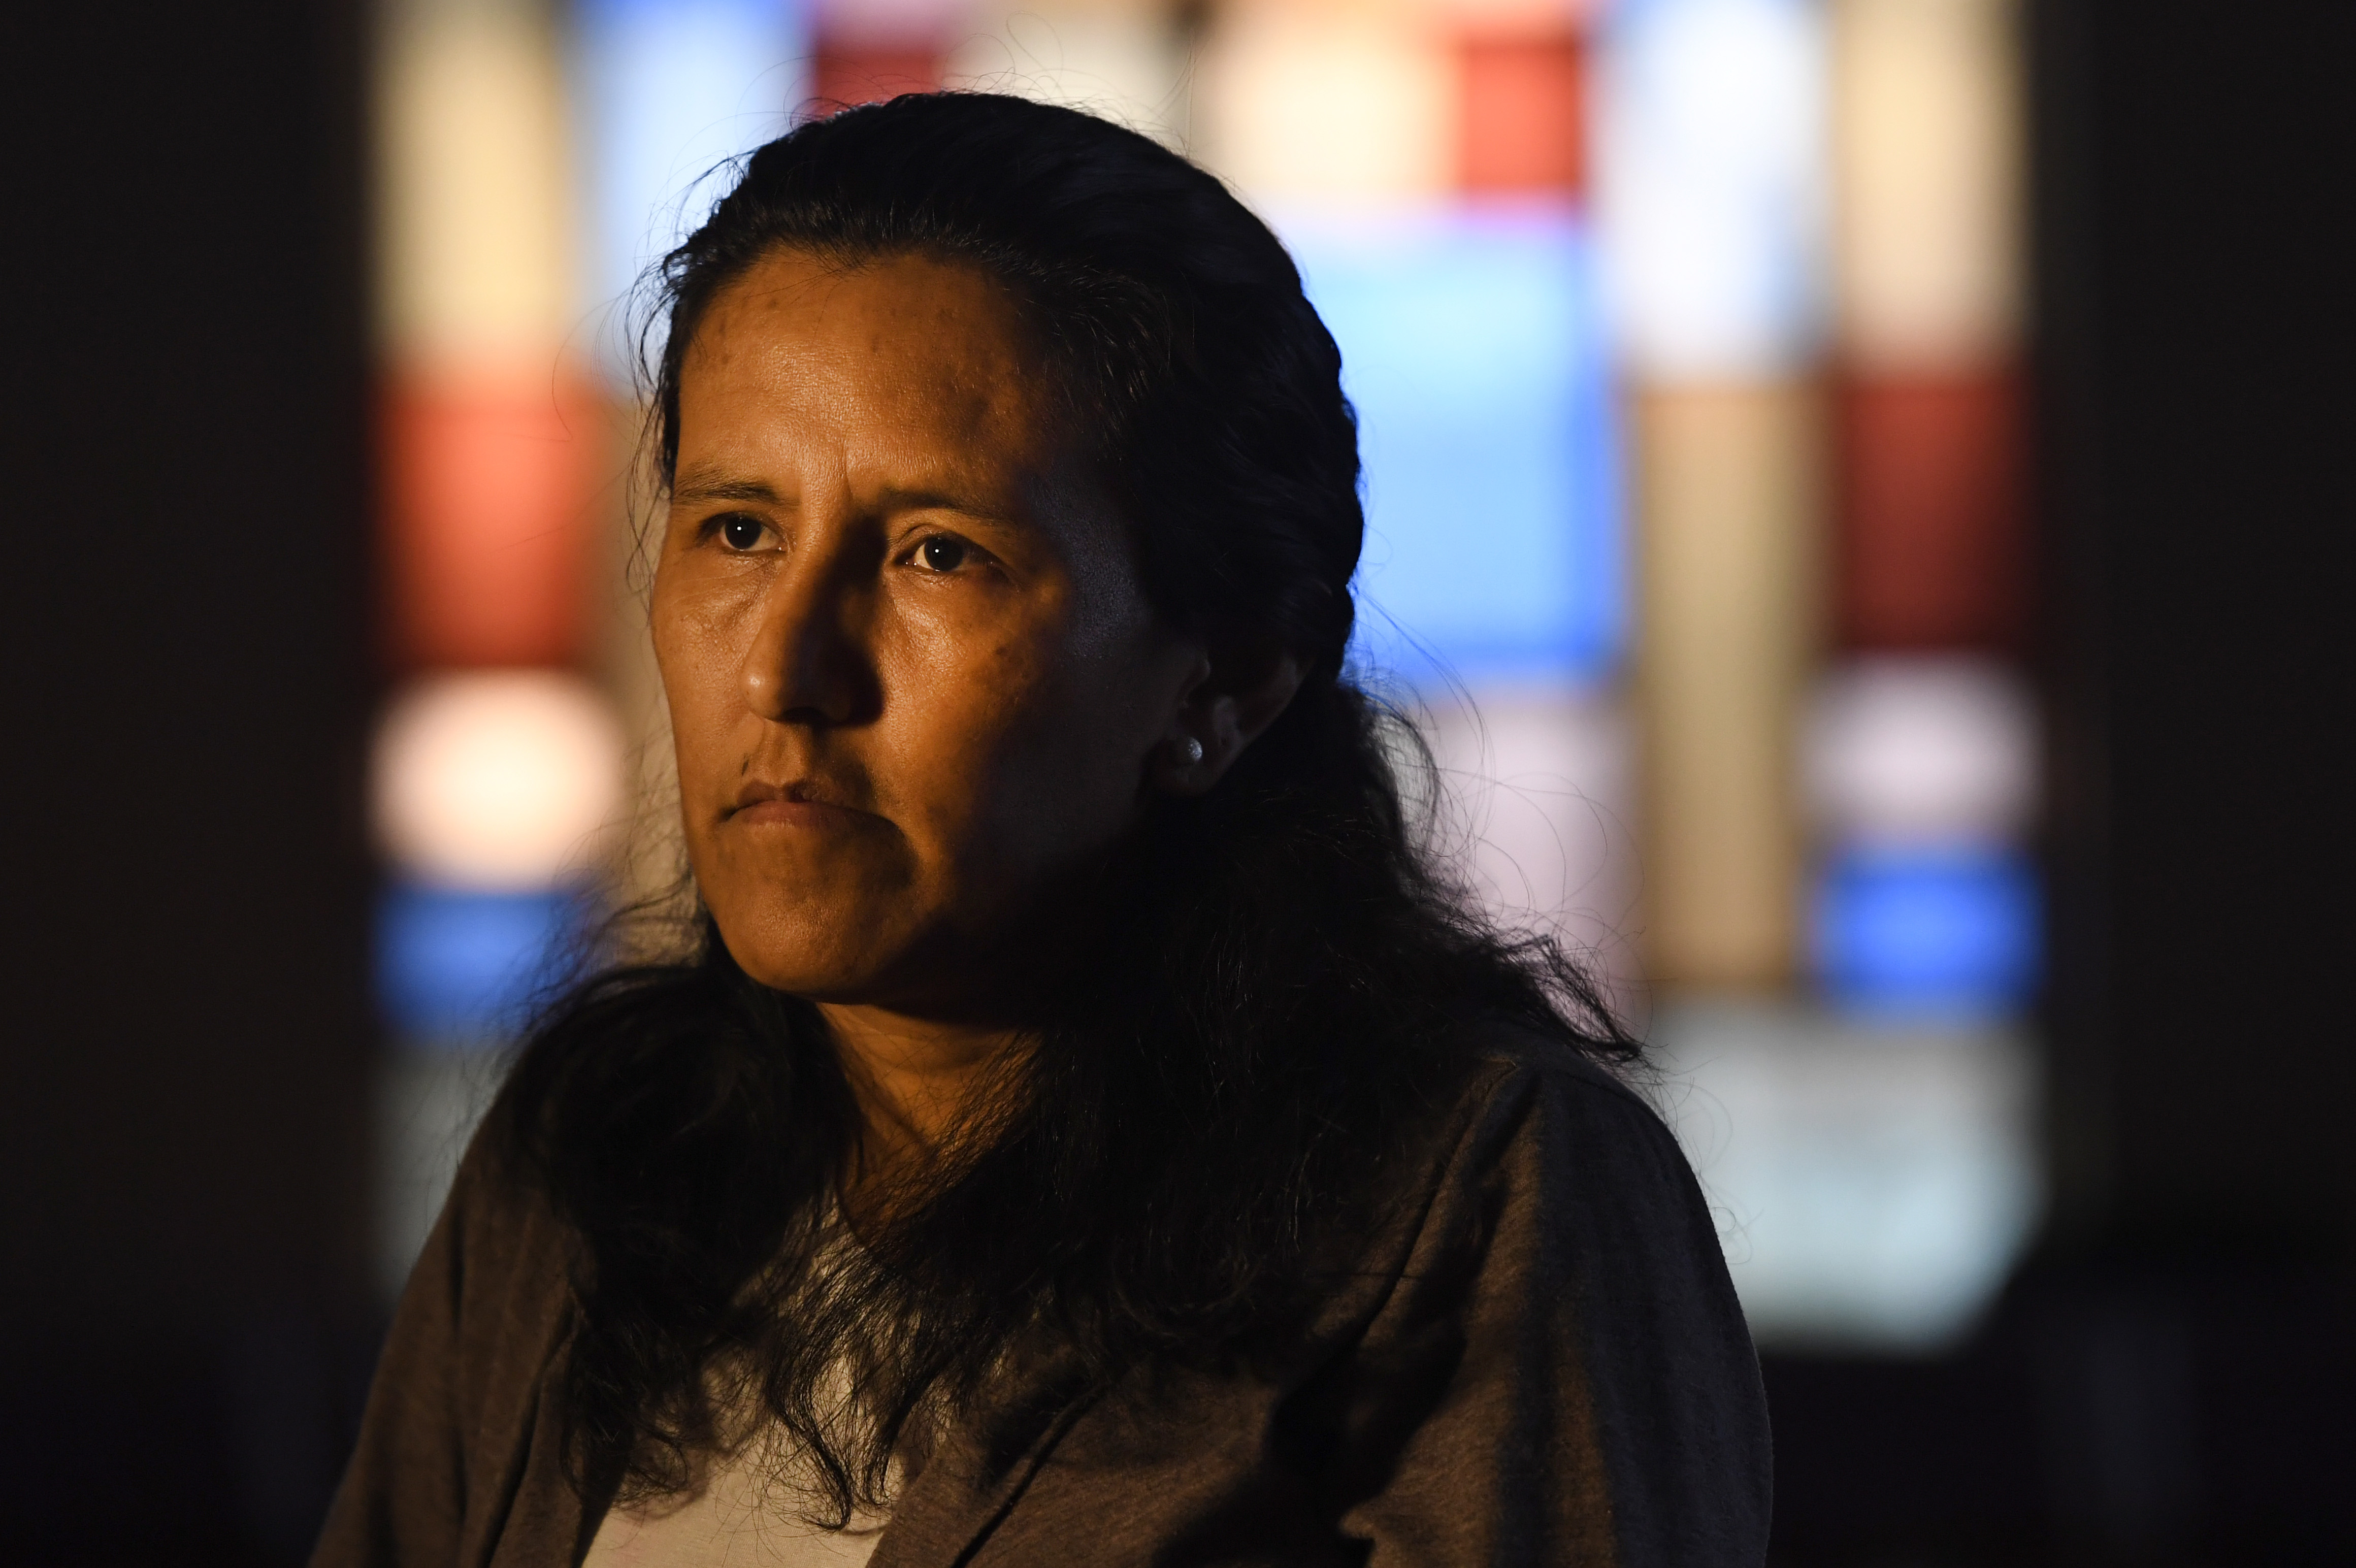 Undocumented immigrant Jeanette Vizguerra is pictured in the sanctuary of the First Unitarian Church on February 16, 2017 in Denver, Colorado. (Helen H. Richardson--The Denver Post via Getty Images) (Helen H. Richardson&mdash;Denver Post via Getty Images)